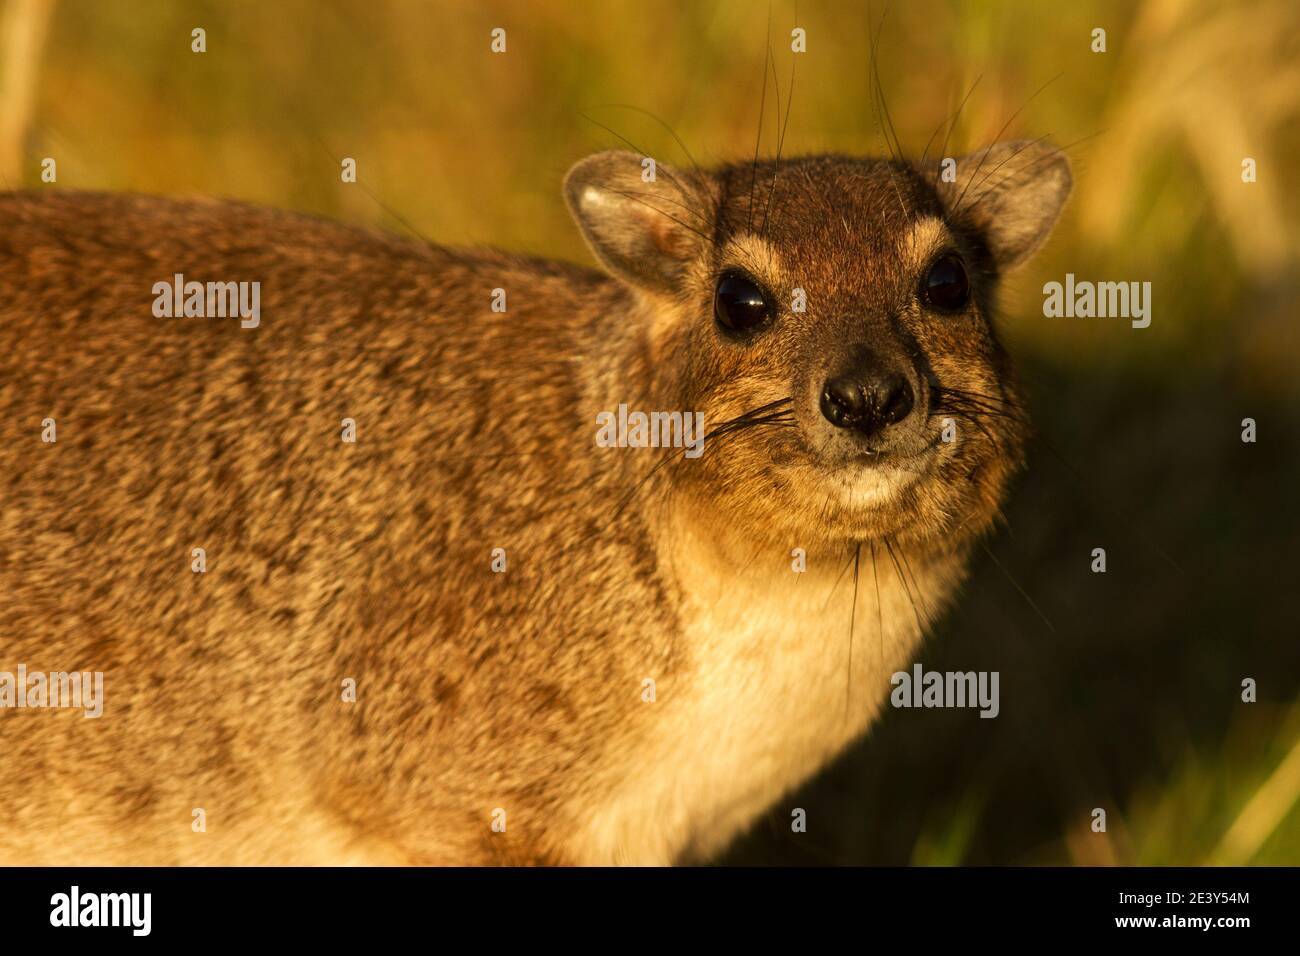 The Bush Hyrax is common in rocky areas and is very agile when it browses foliage up in trees and bushes, though it looks ill-equipped to do so Stock Photo